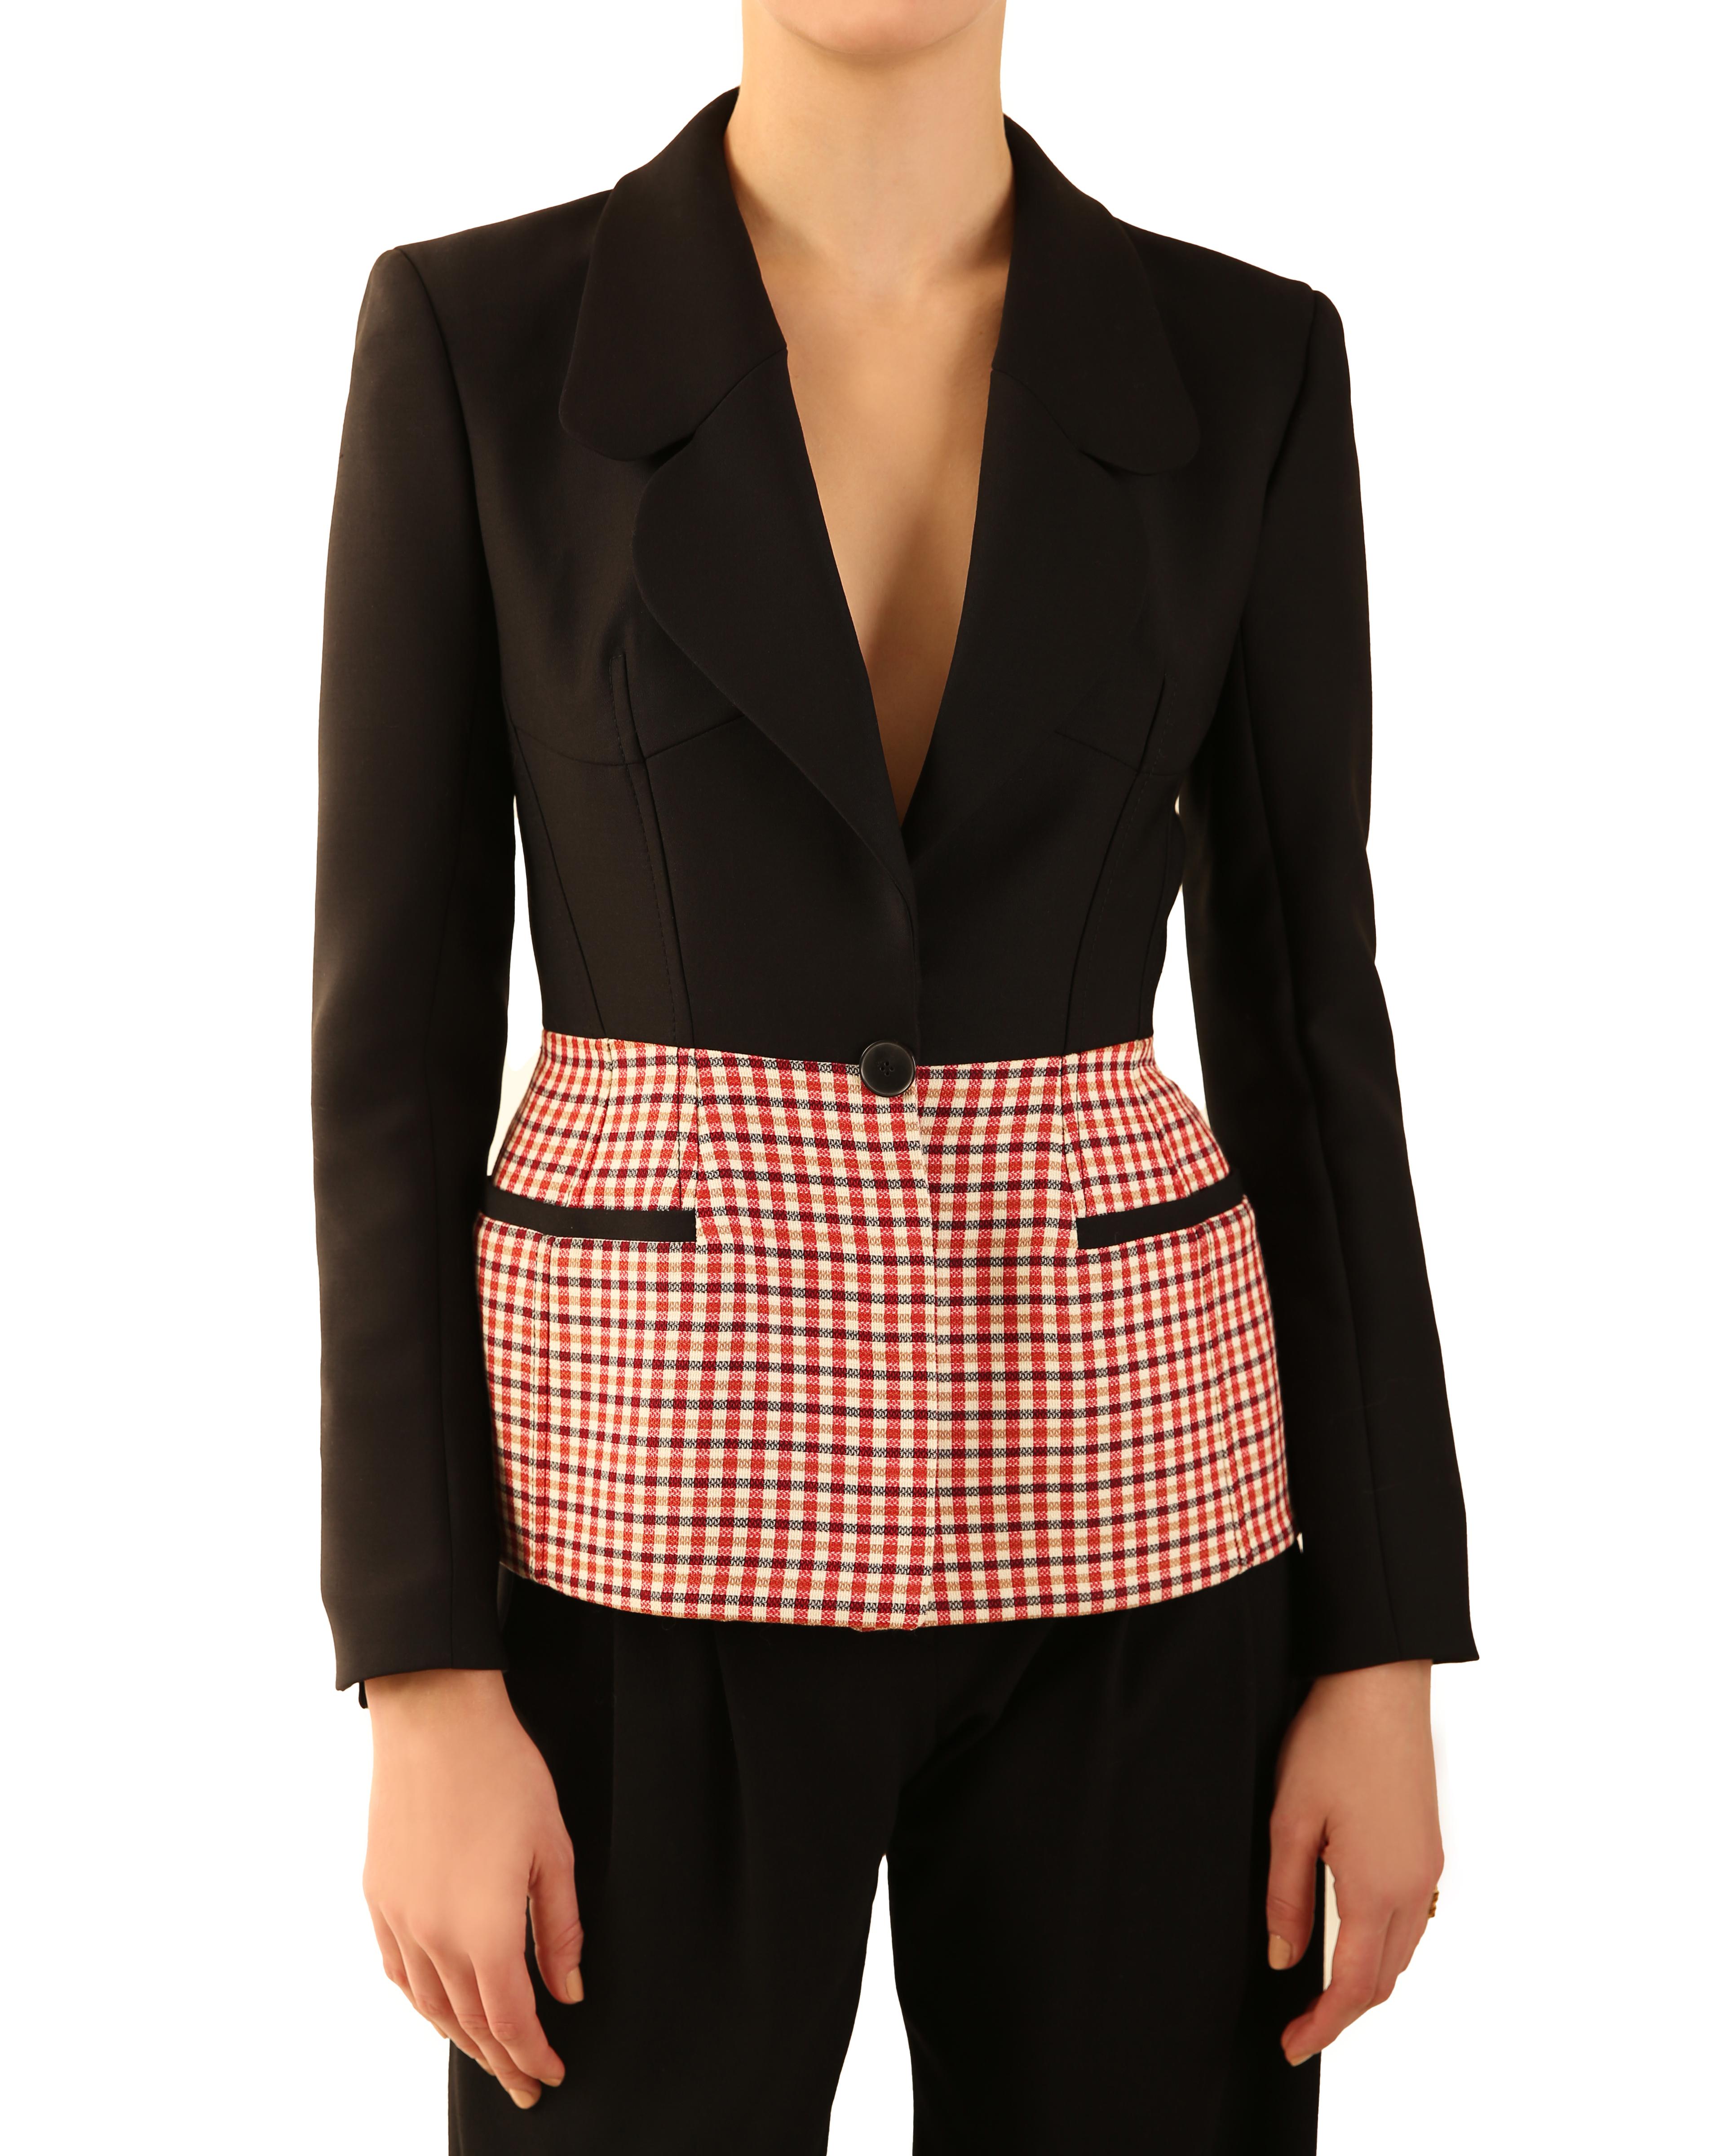 From Christian Dior Resort 2016 a beautifully fitted black blazer with a large oversized collar and checkered print peplum style lower
Check print consists of the colours red, black, white and brown

FREE SHIPPING WORLDWIDE!!!

Composition:
99%